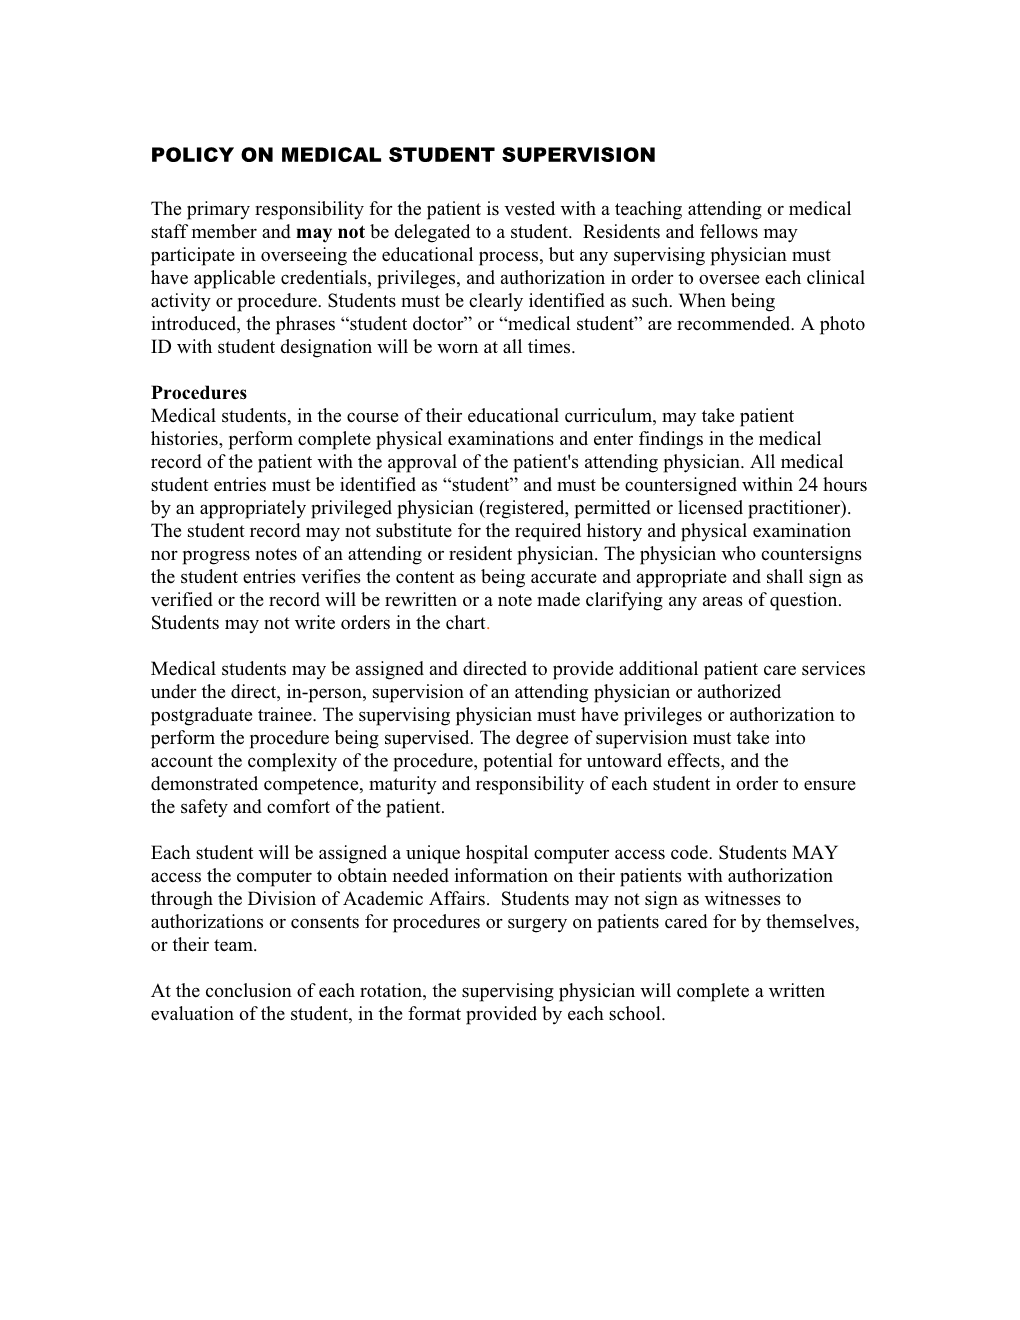 Policy on Medical Student Supervision